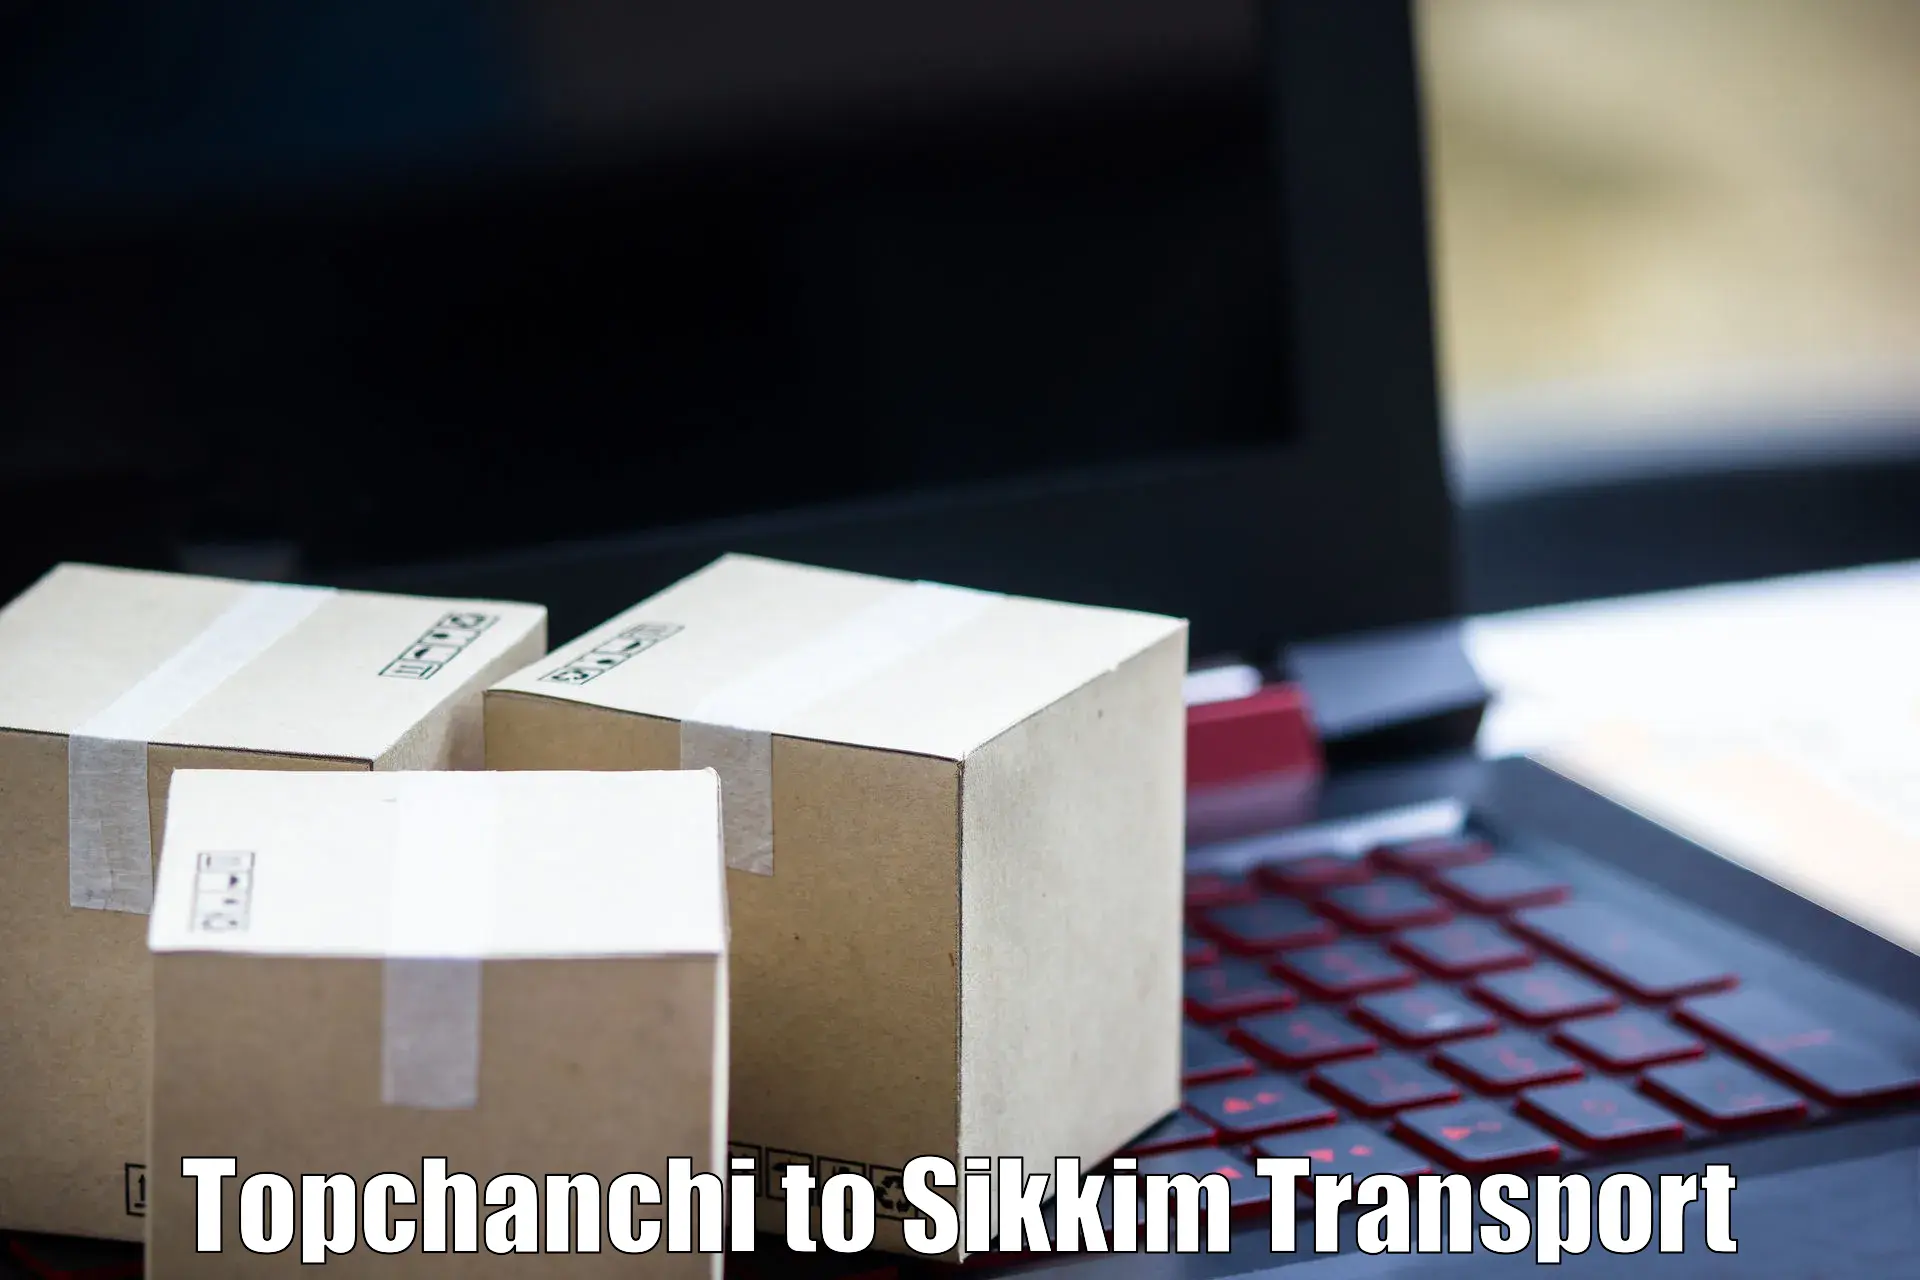 Online transport service Topchanchi to East Sikkim